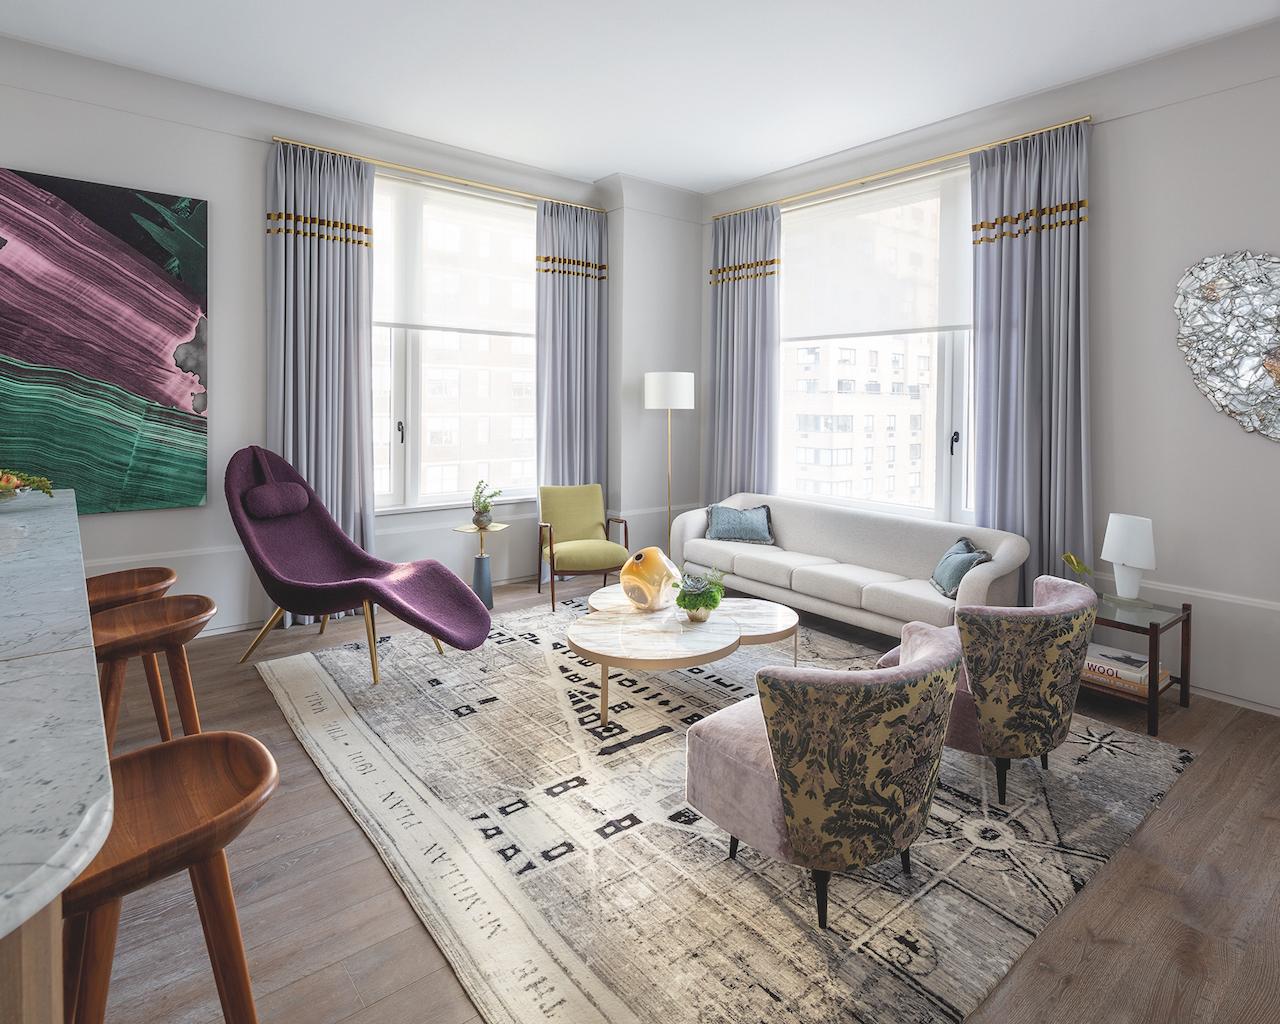 Property Investment: 180 East 88th Street in Manhattan